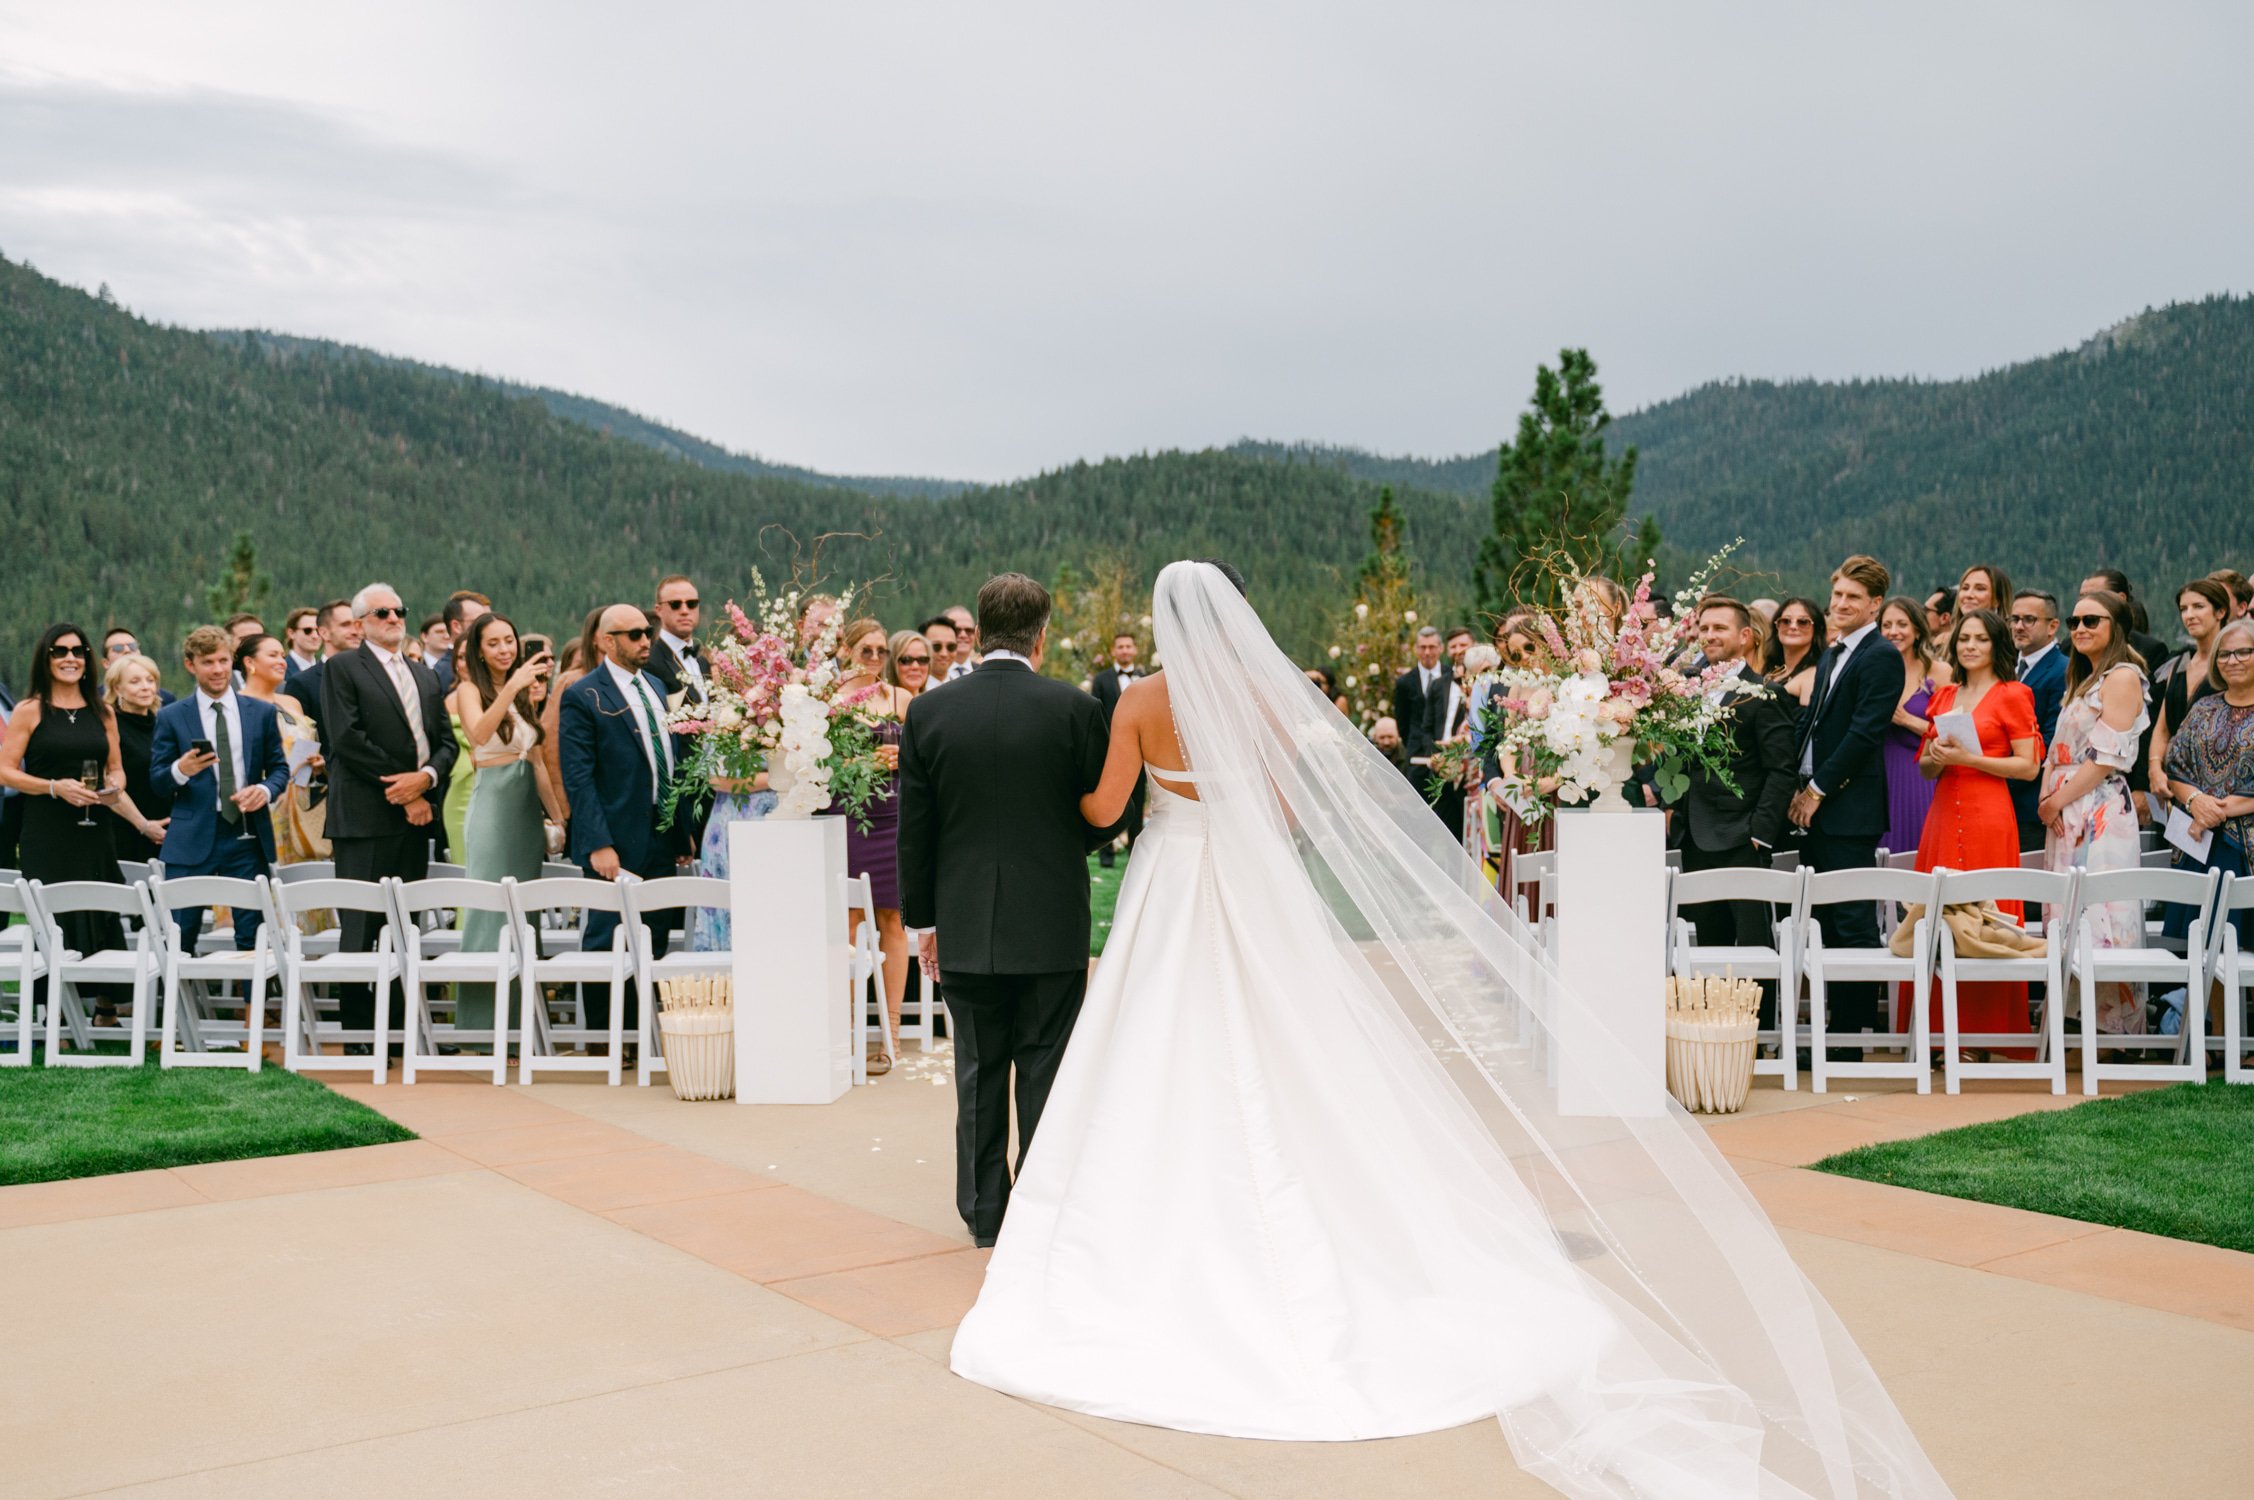 Martis Camp Wedding, photo of the bride with her father walking down the aisle